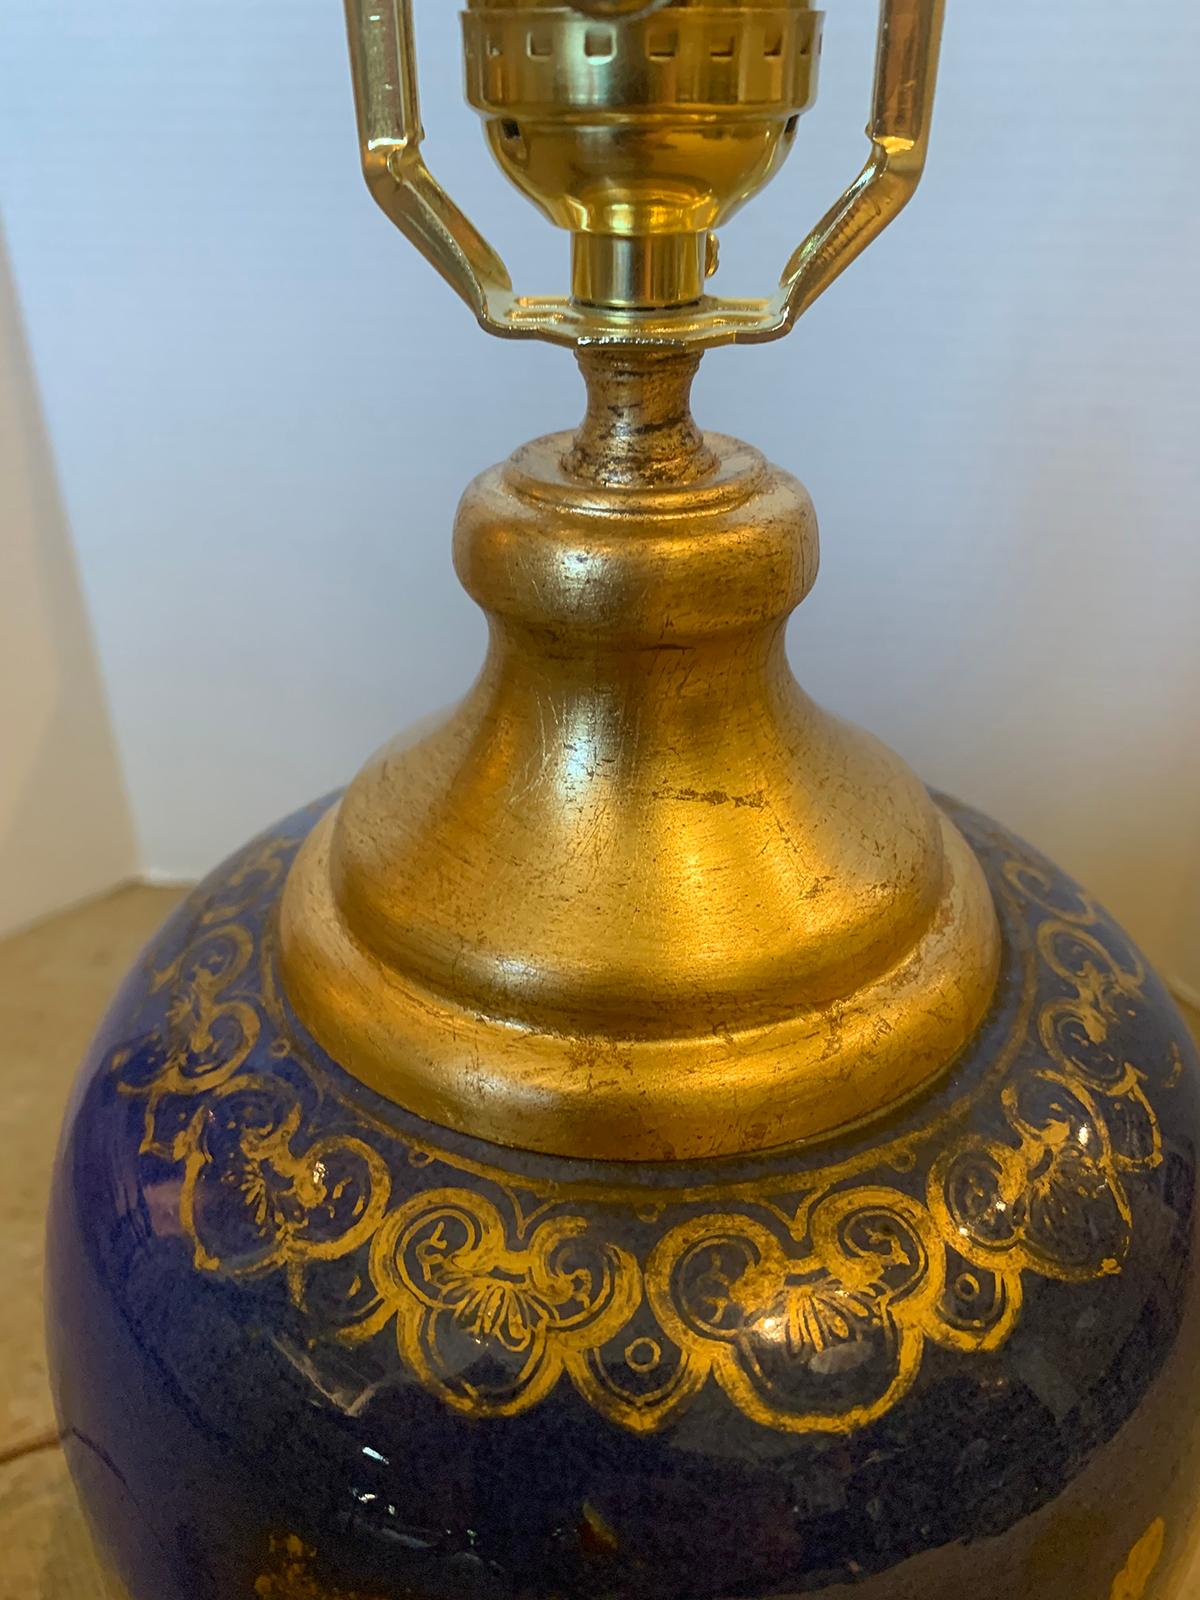 Chinese blue and gilt porcelain lamp on custom giltwood base, circa 1800
New wiring.